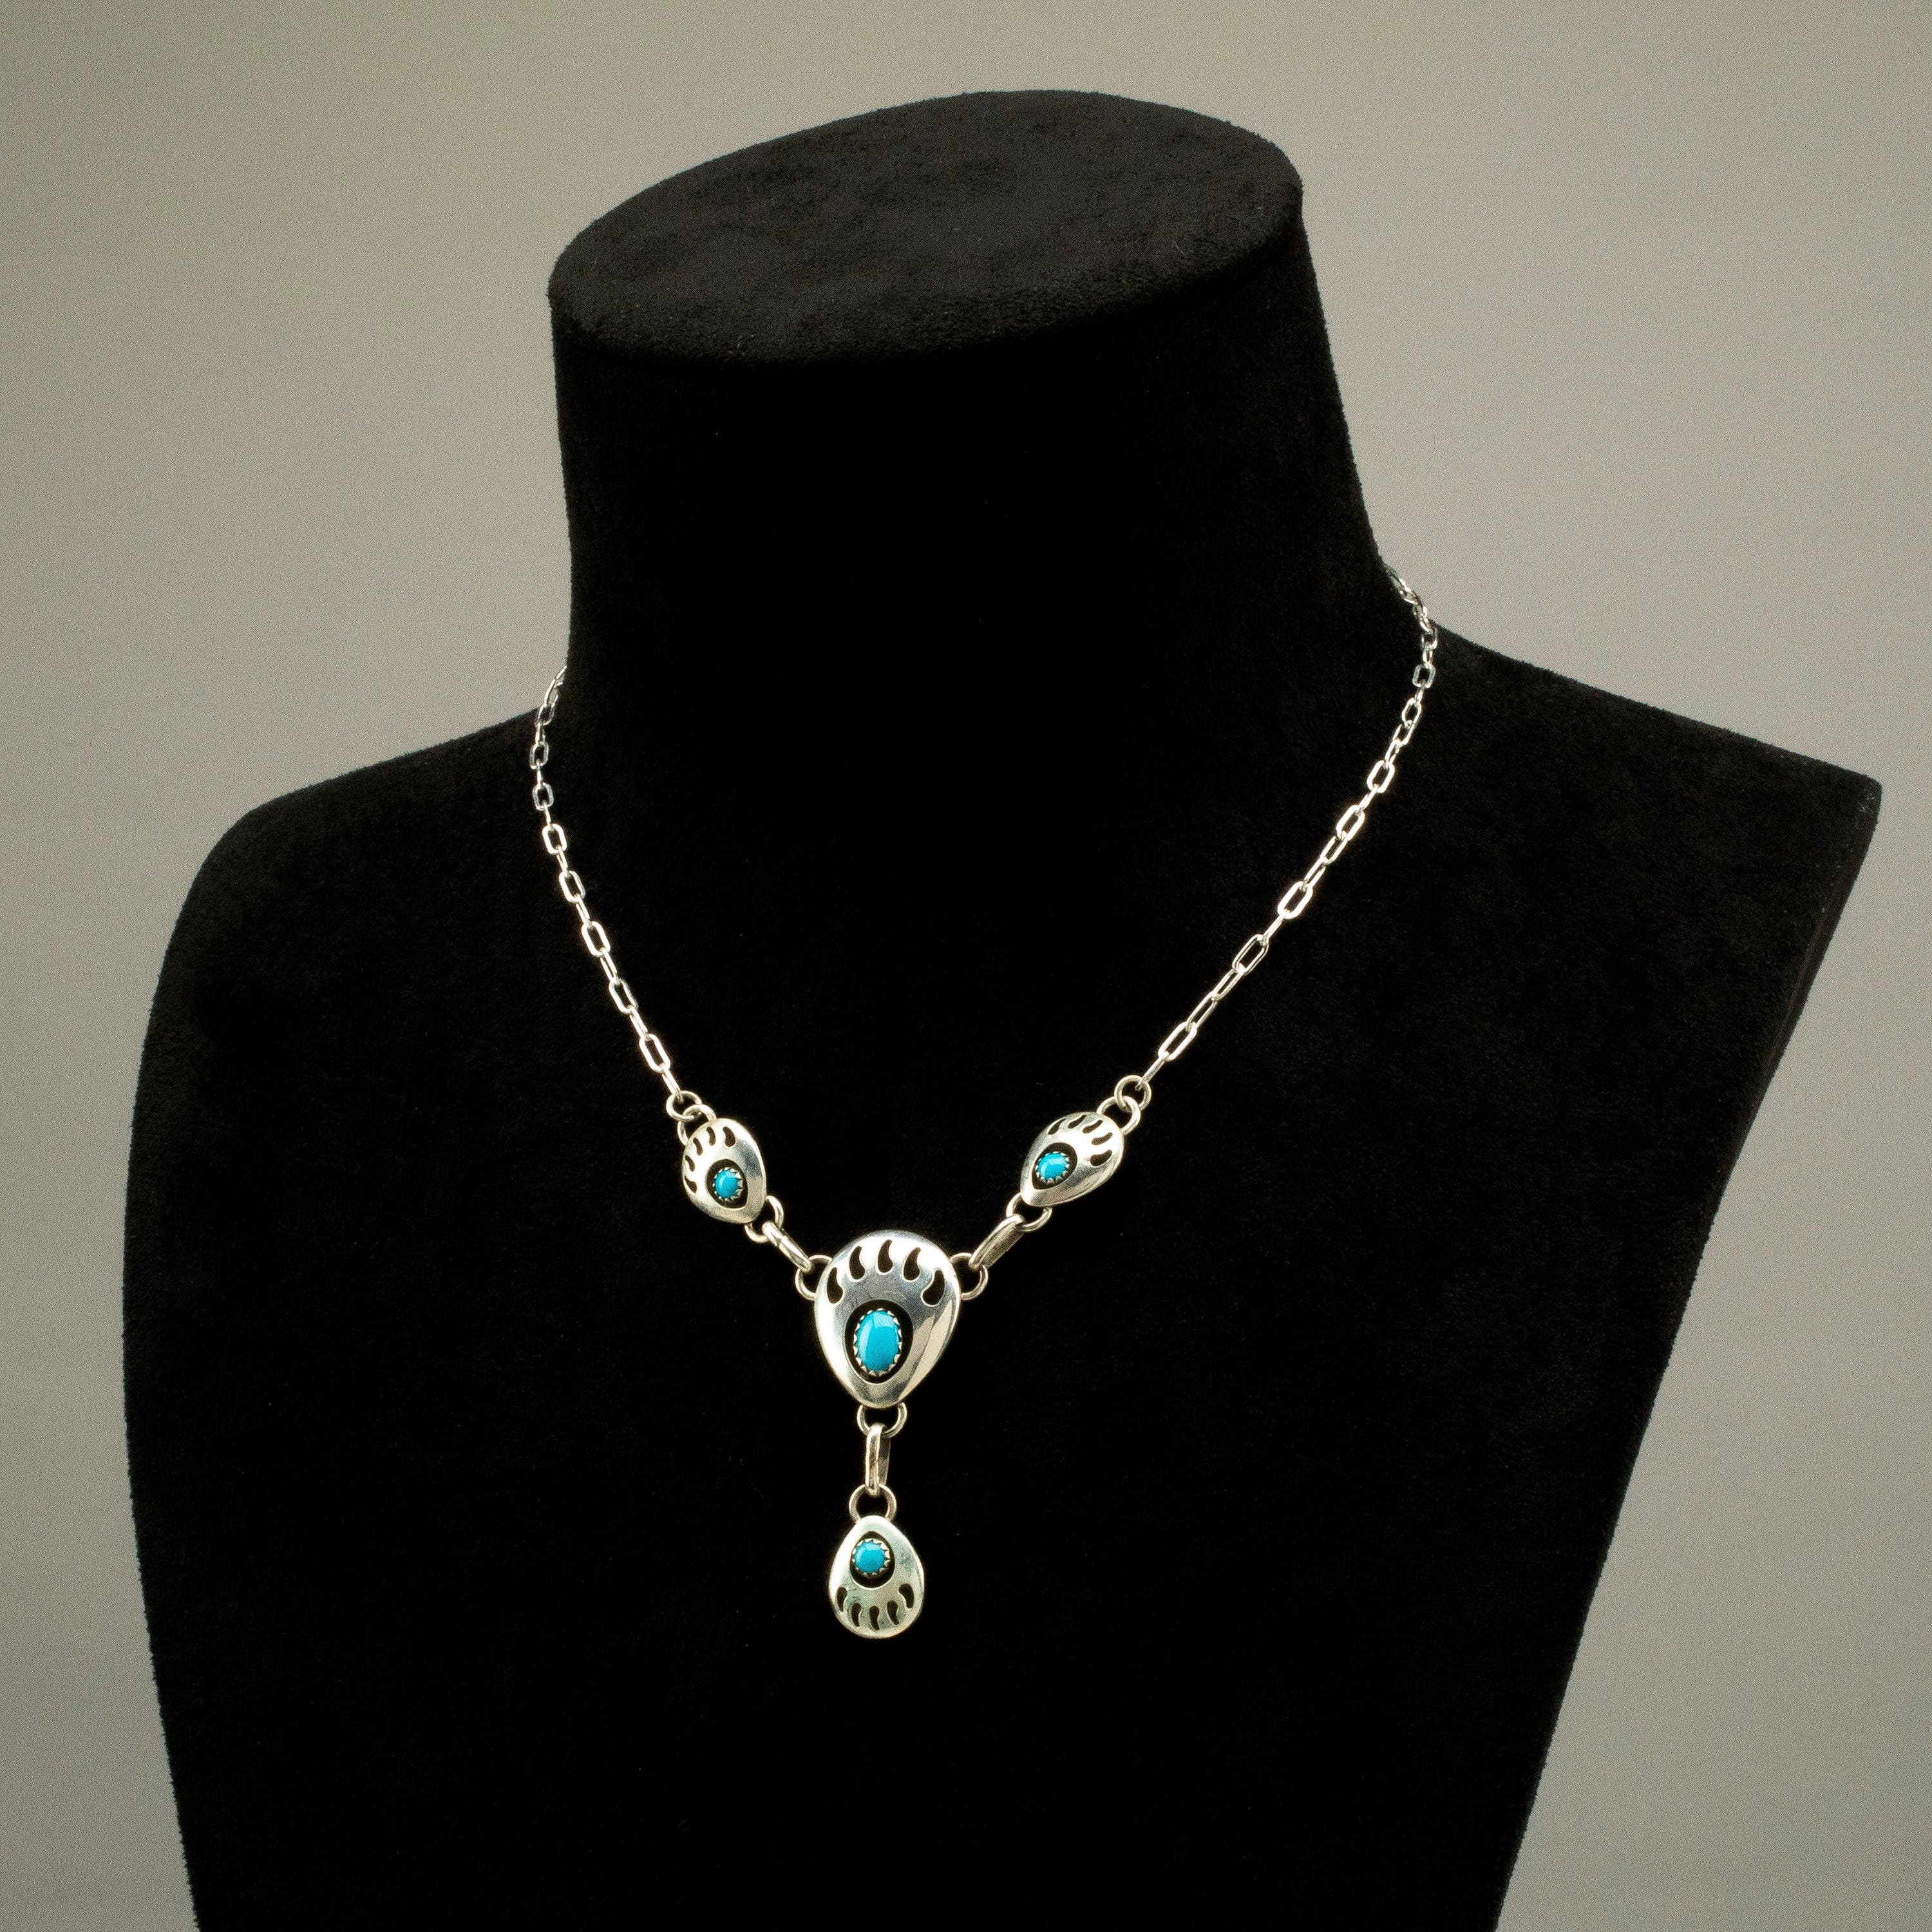 Fabulous STERLING & TURQUOISE Bear Claw Design Vintage Necklace Set - Ruby  Lane